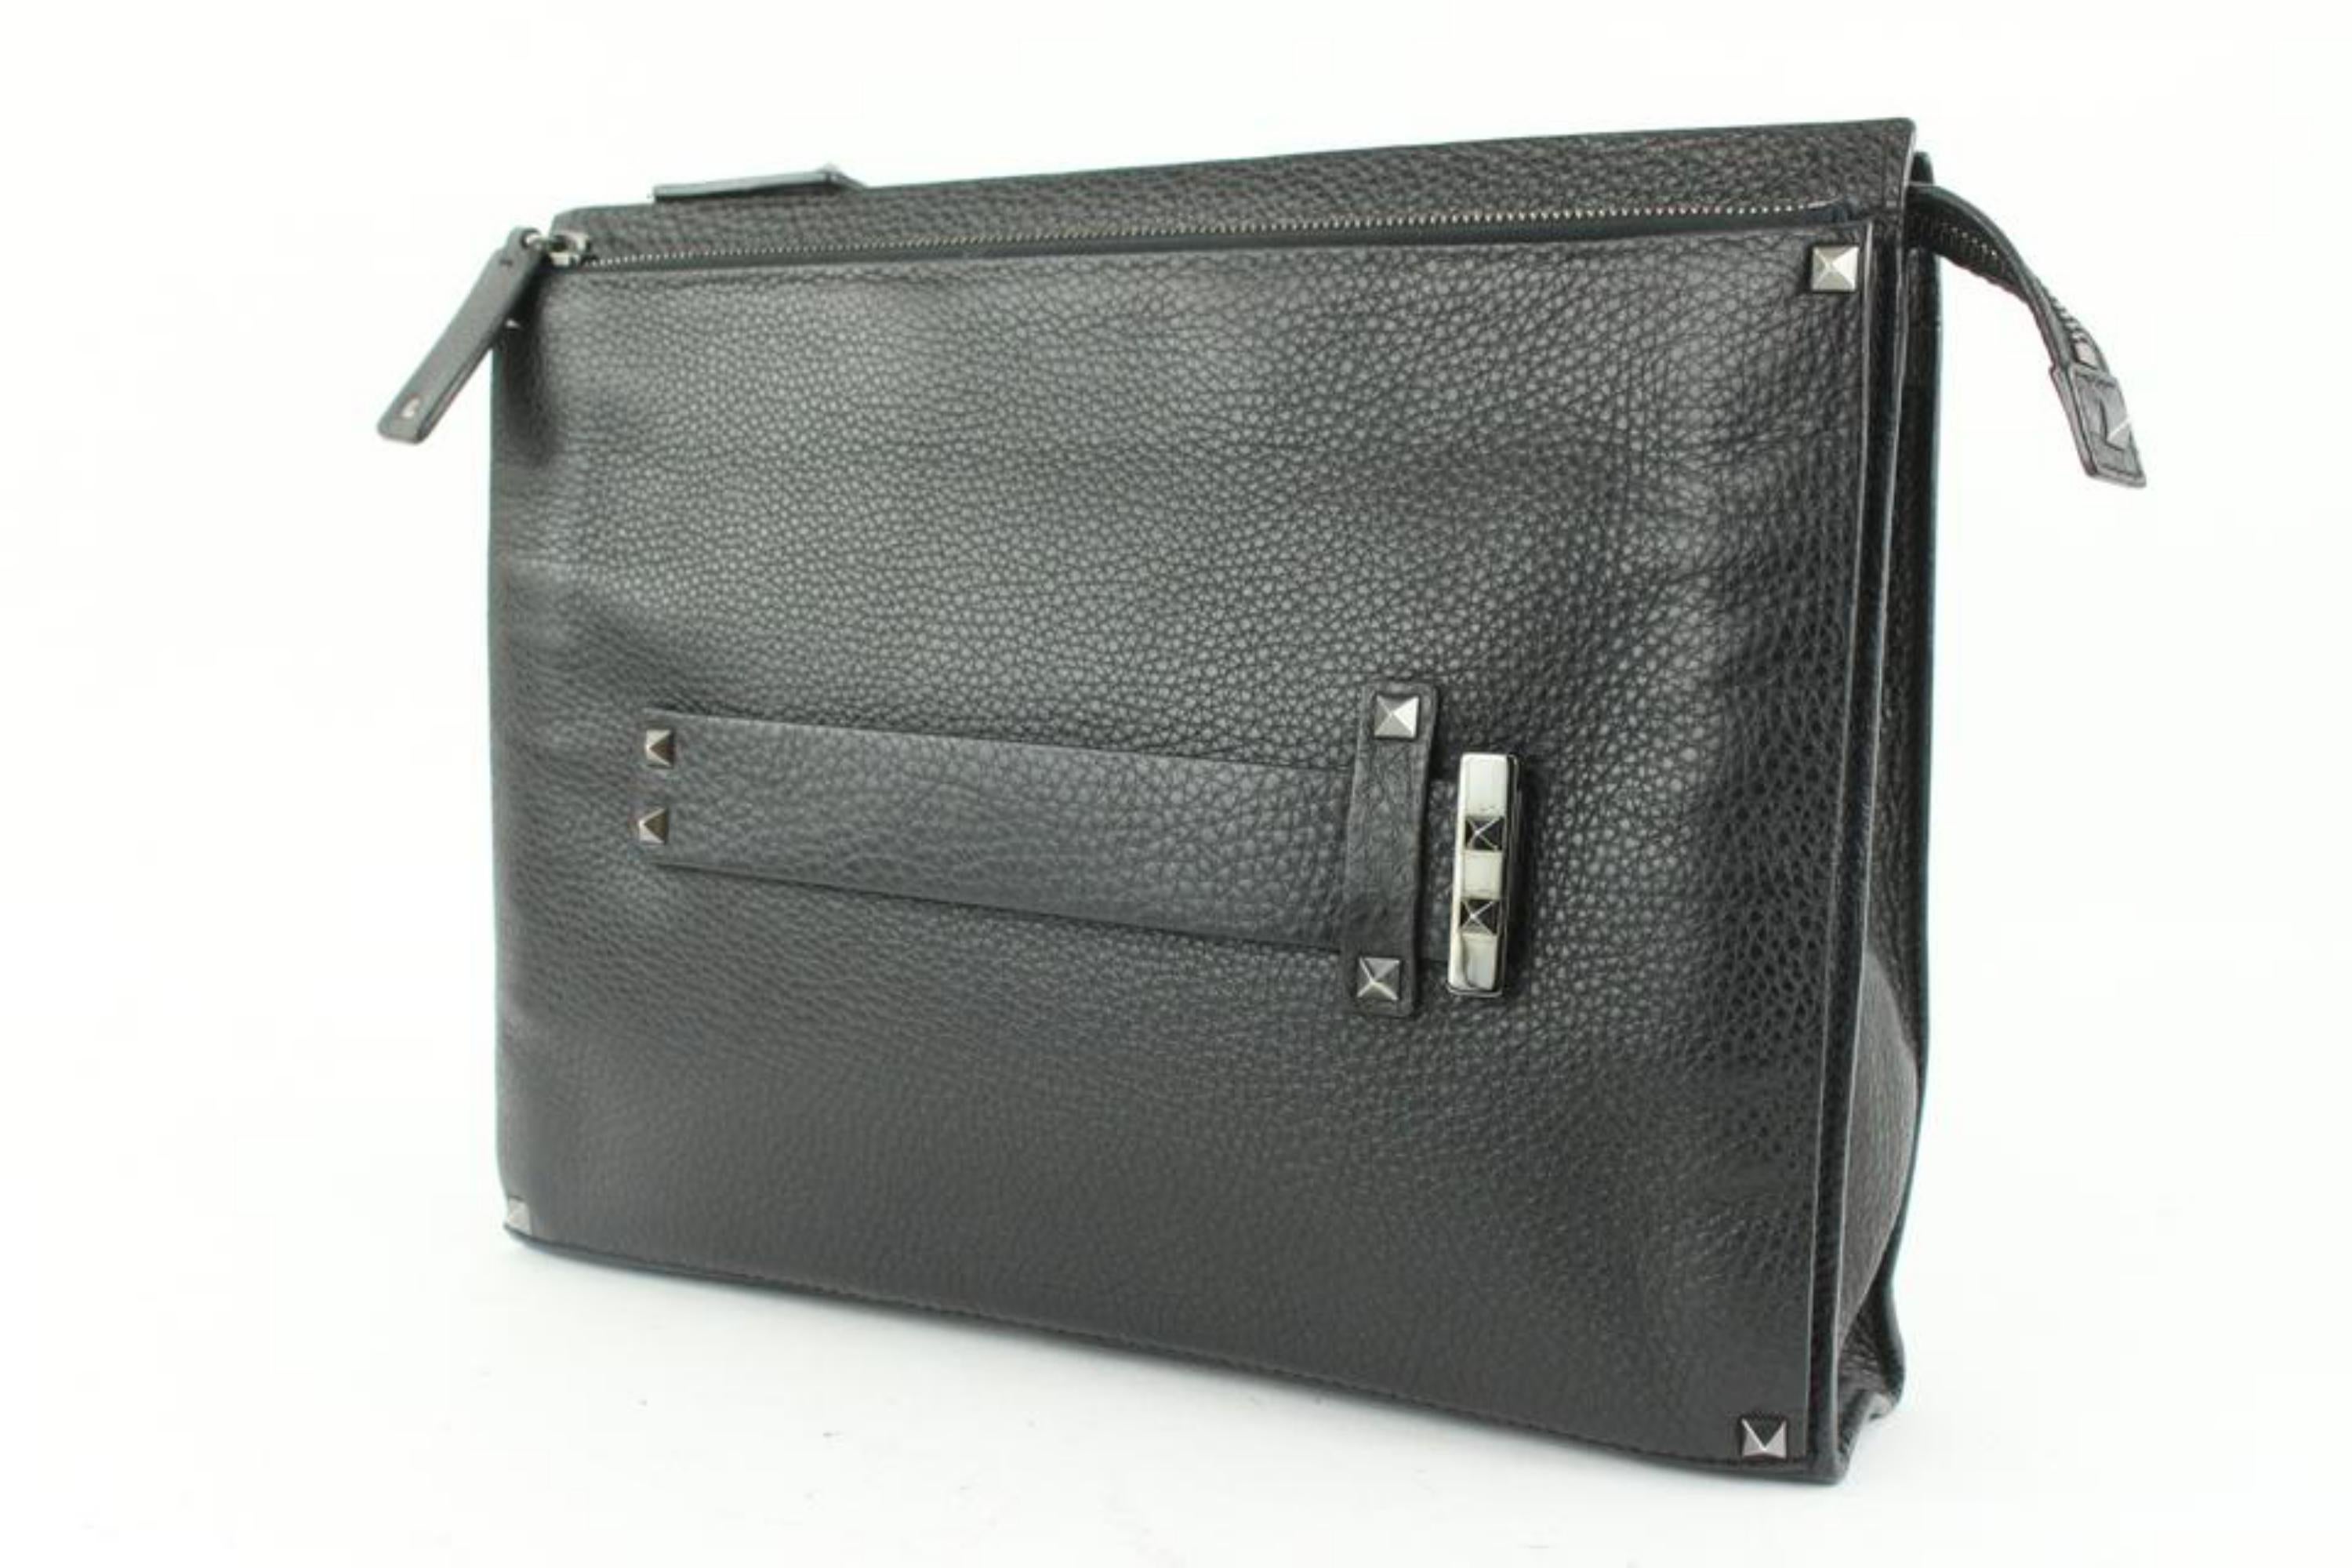 Valentino Black Leather Rockstud Panel Clutch Handle Bag 111va17
Date Code/Serial Number: BS-M467VAP2
Made In: Italy
Measurements: Length:  12